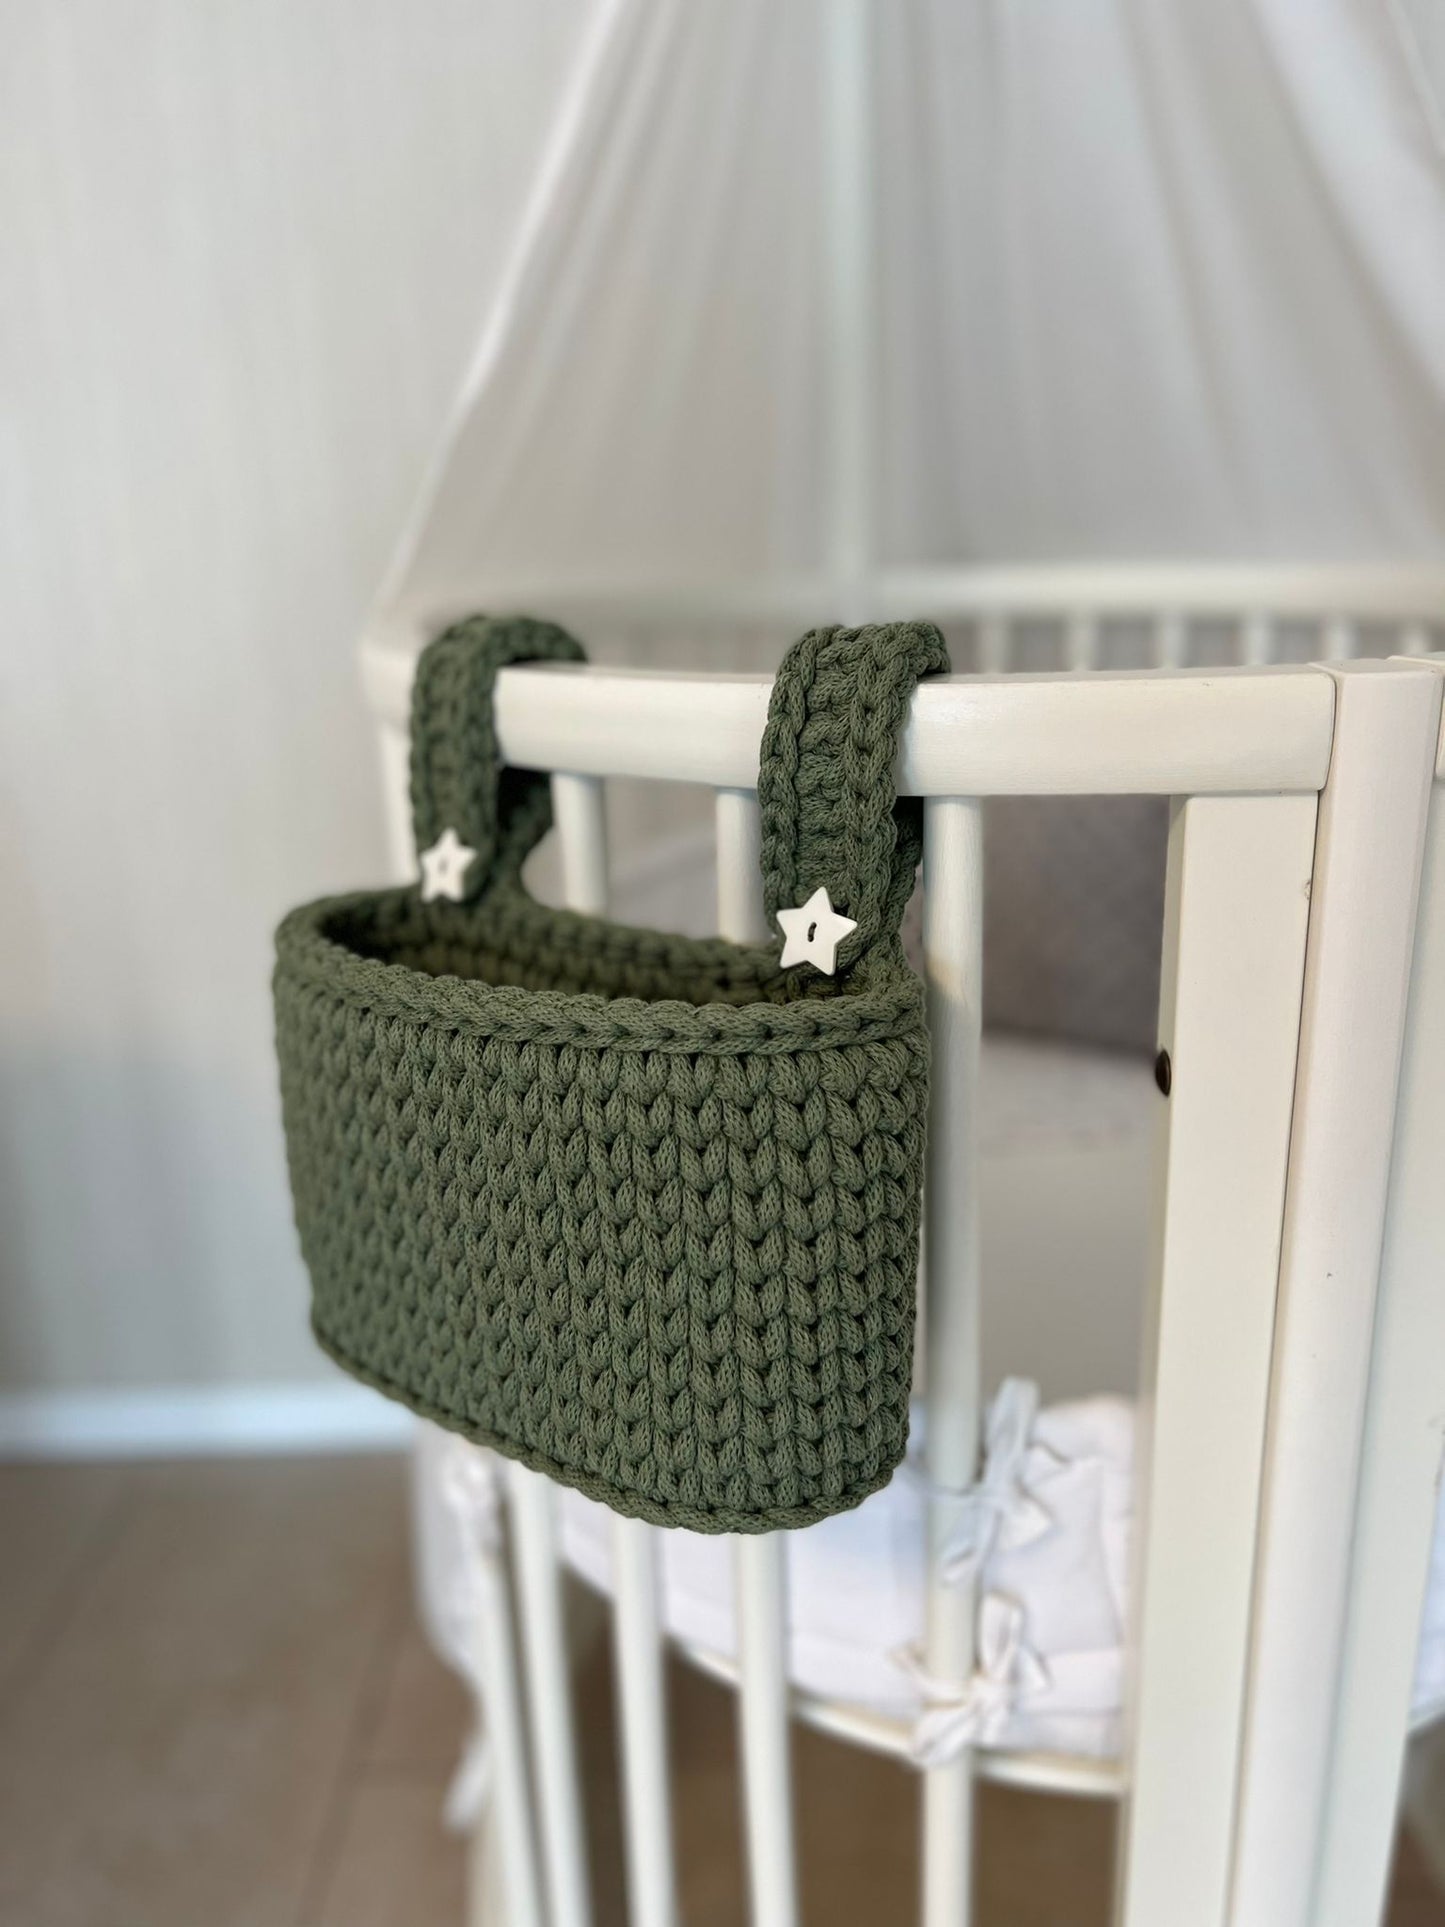 Hanging basket for the baby bed